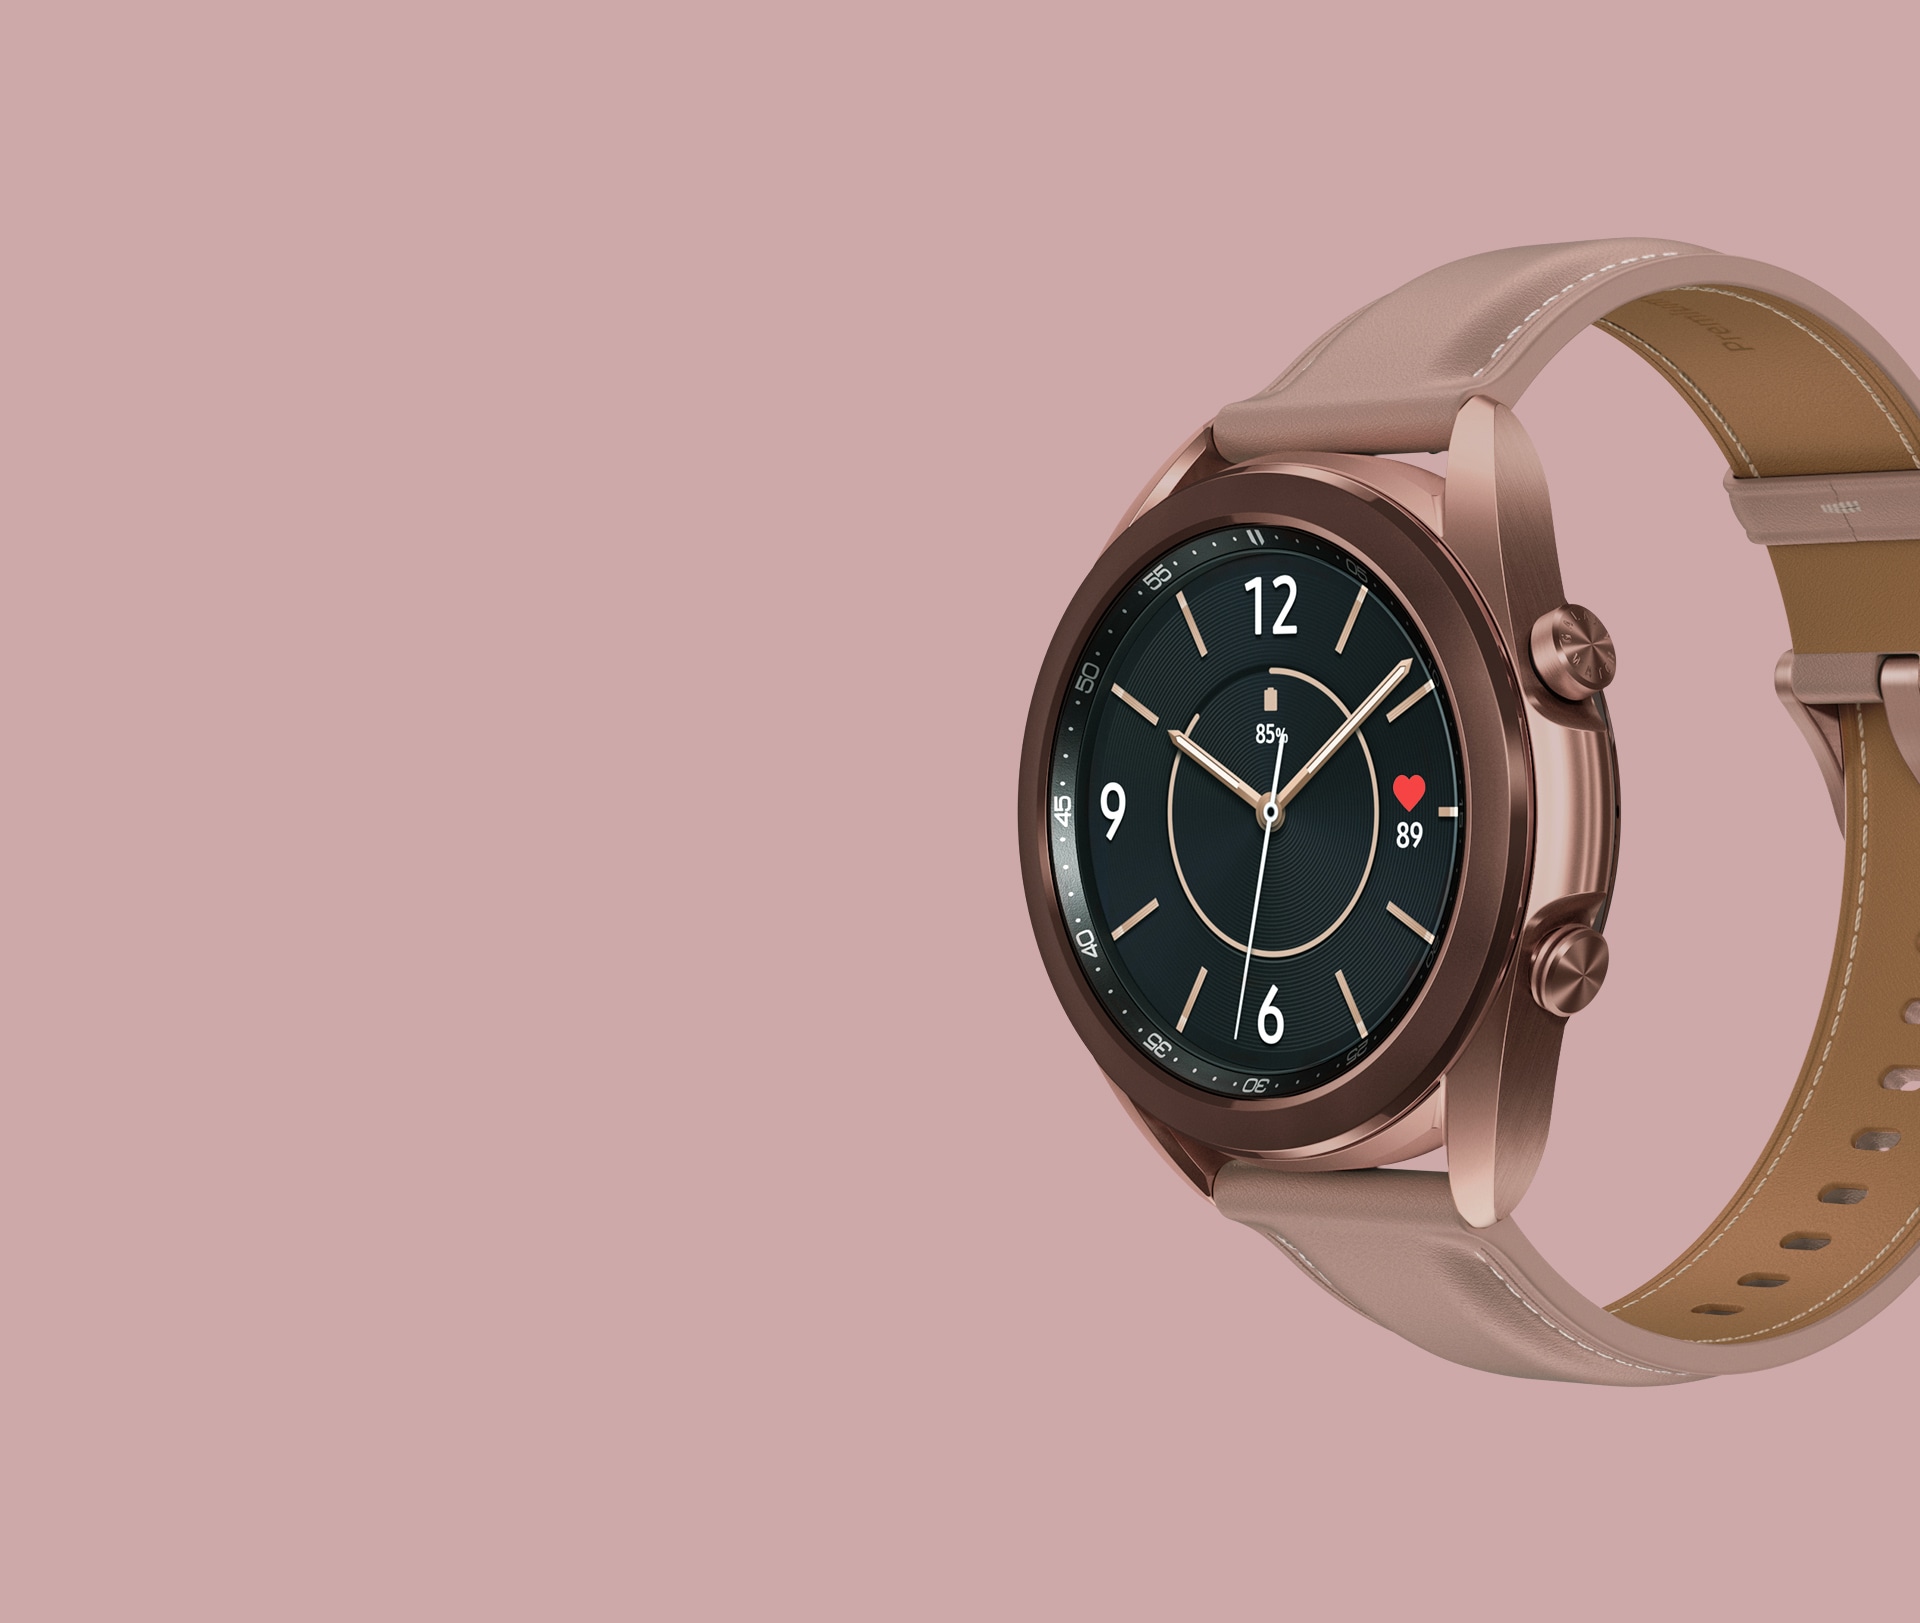 41mm Galaxy Watch3 in Mystic Bronze with a Female Classic Watch Face seen from an angle